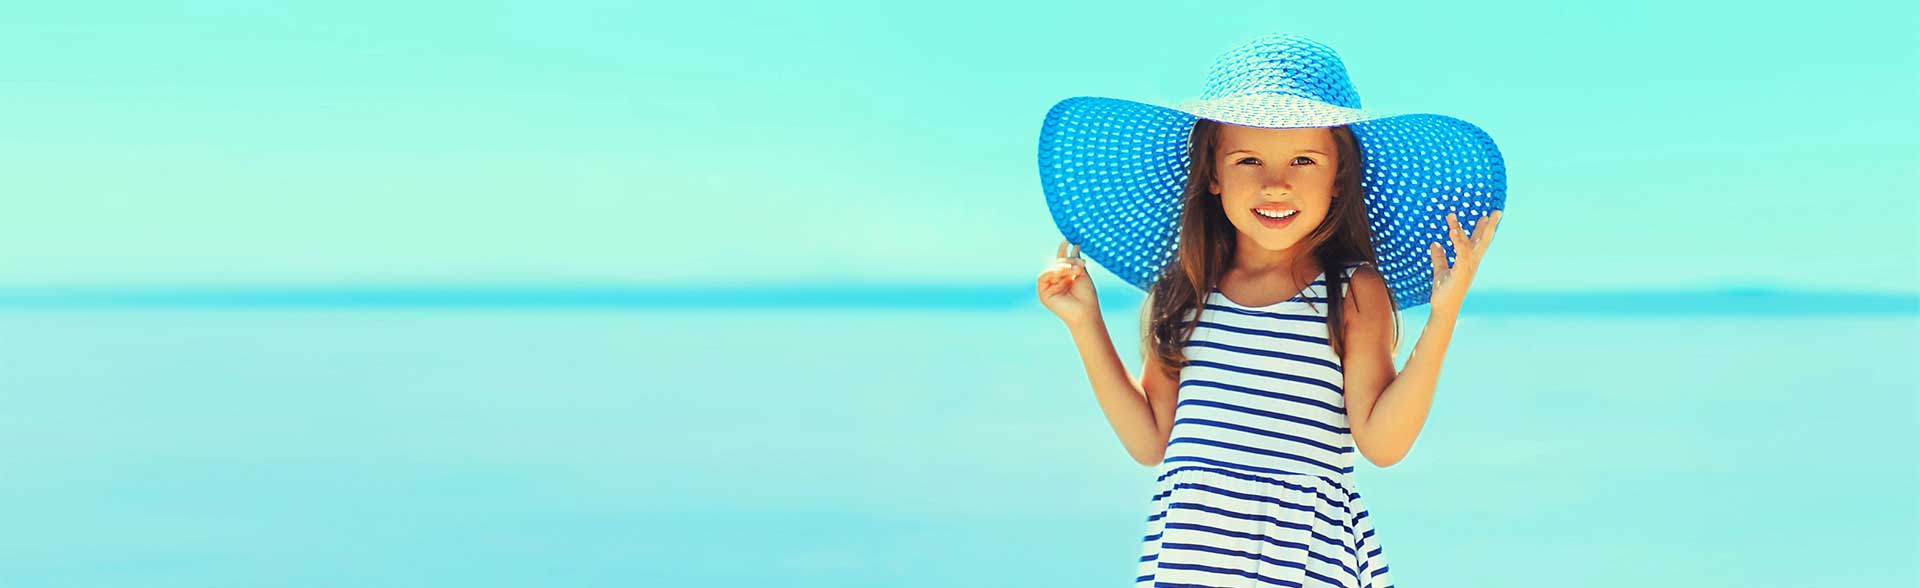 Young girl on beach with a dress and sun hat